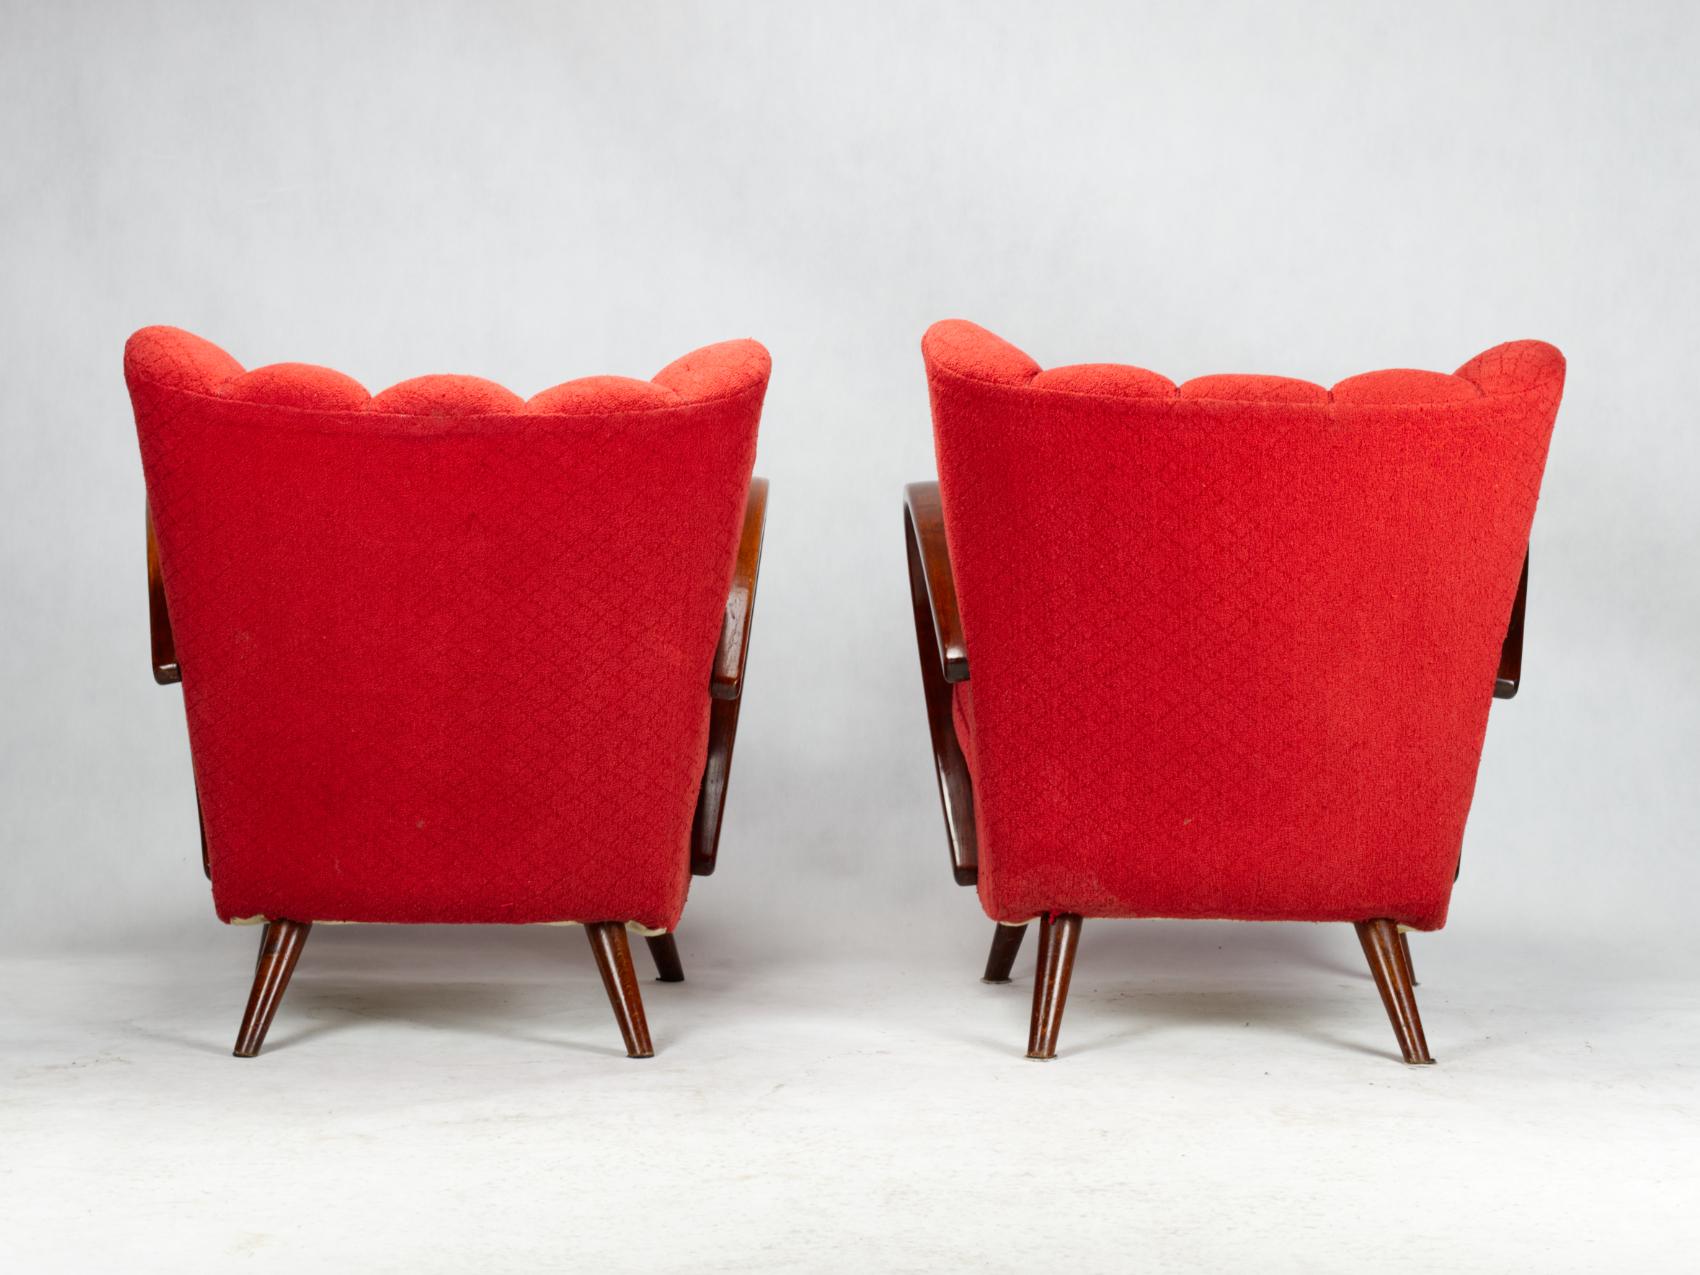 Czech Pair of Lounge Chairs by Jindrich Halabala, 1950s